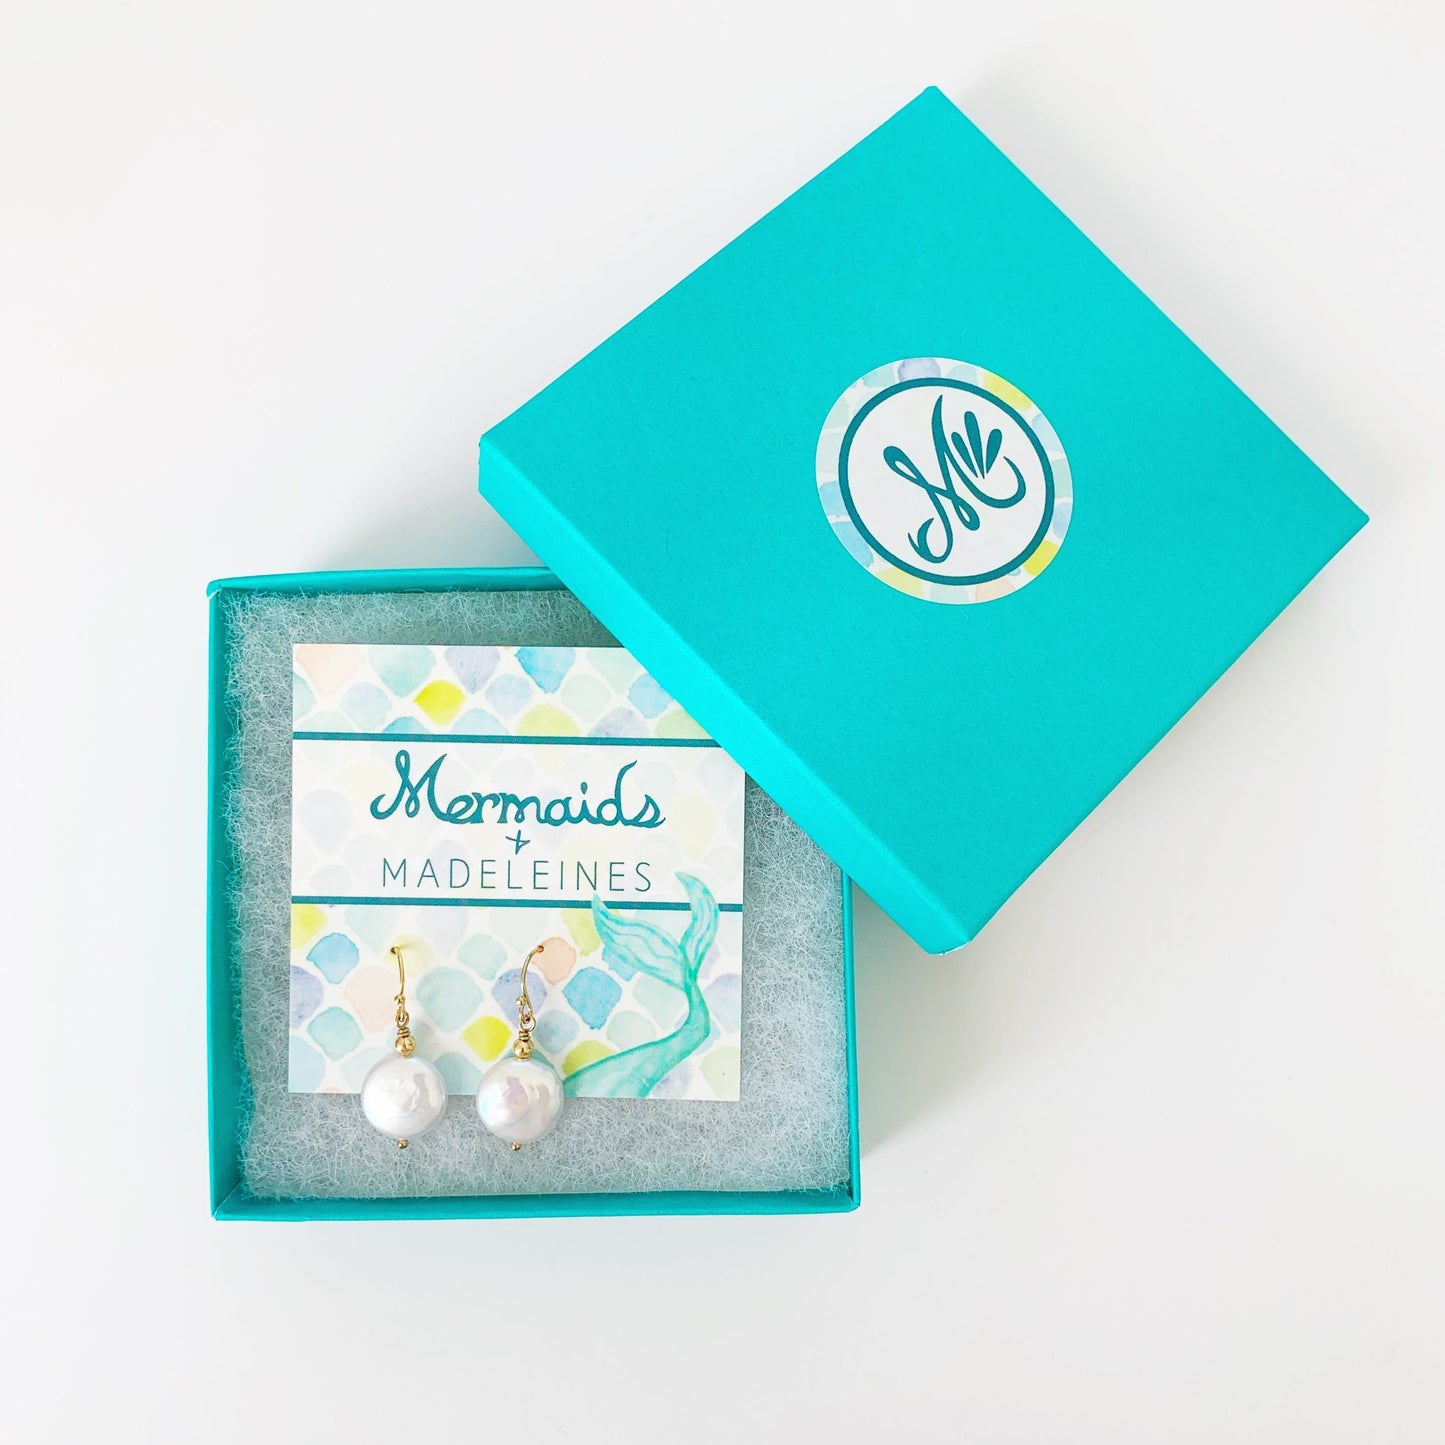 Newport Gala earrings in gold filled pictured carded in a teal gift box on a white surface